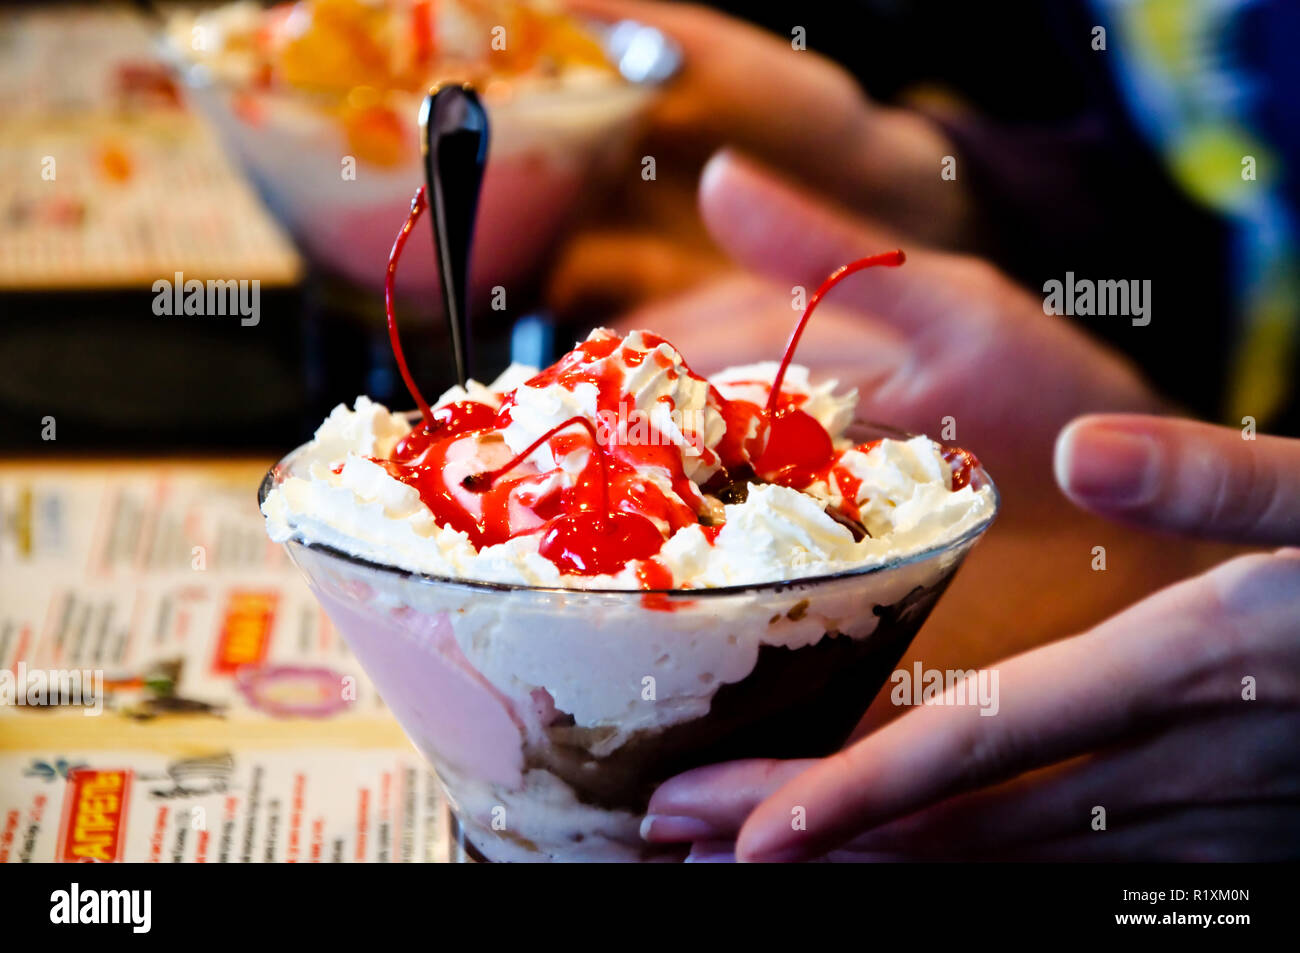 Tasty sweet cherry ice-cream with open hands and a spoon. Stock Photo